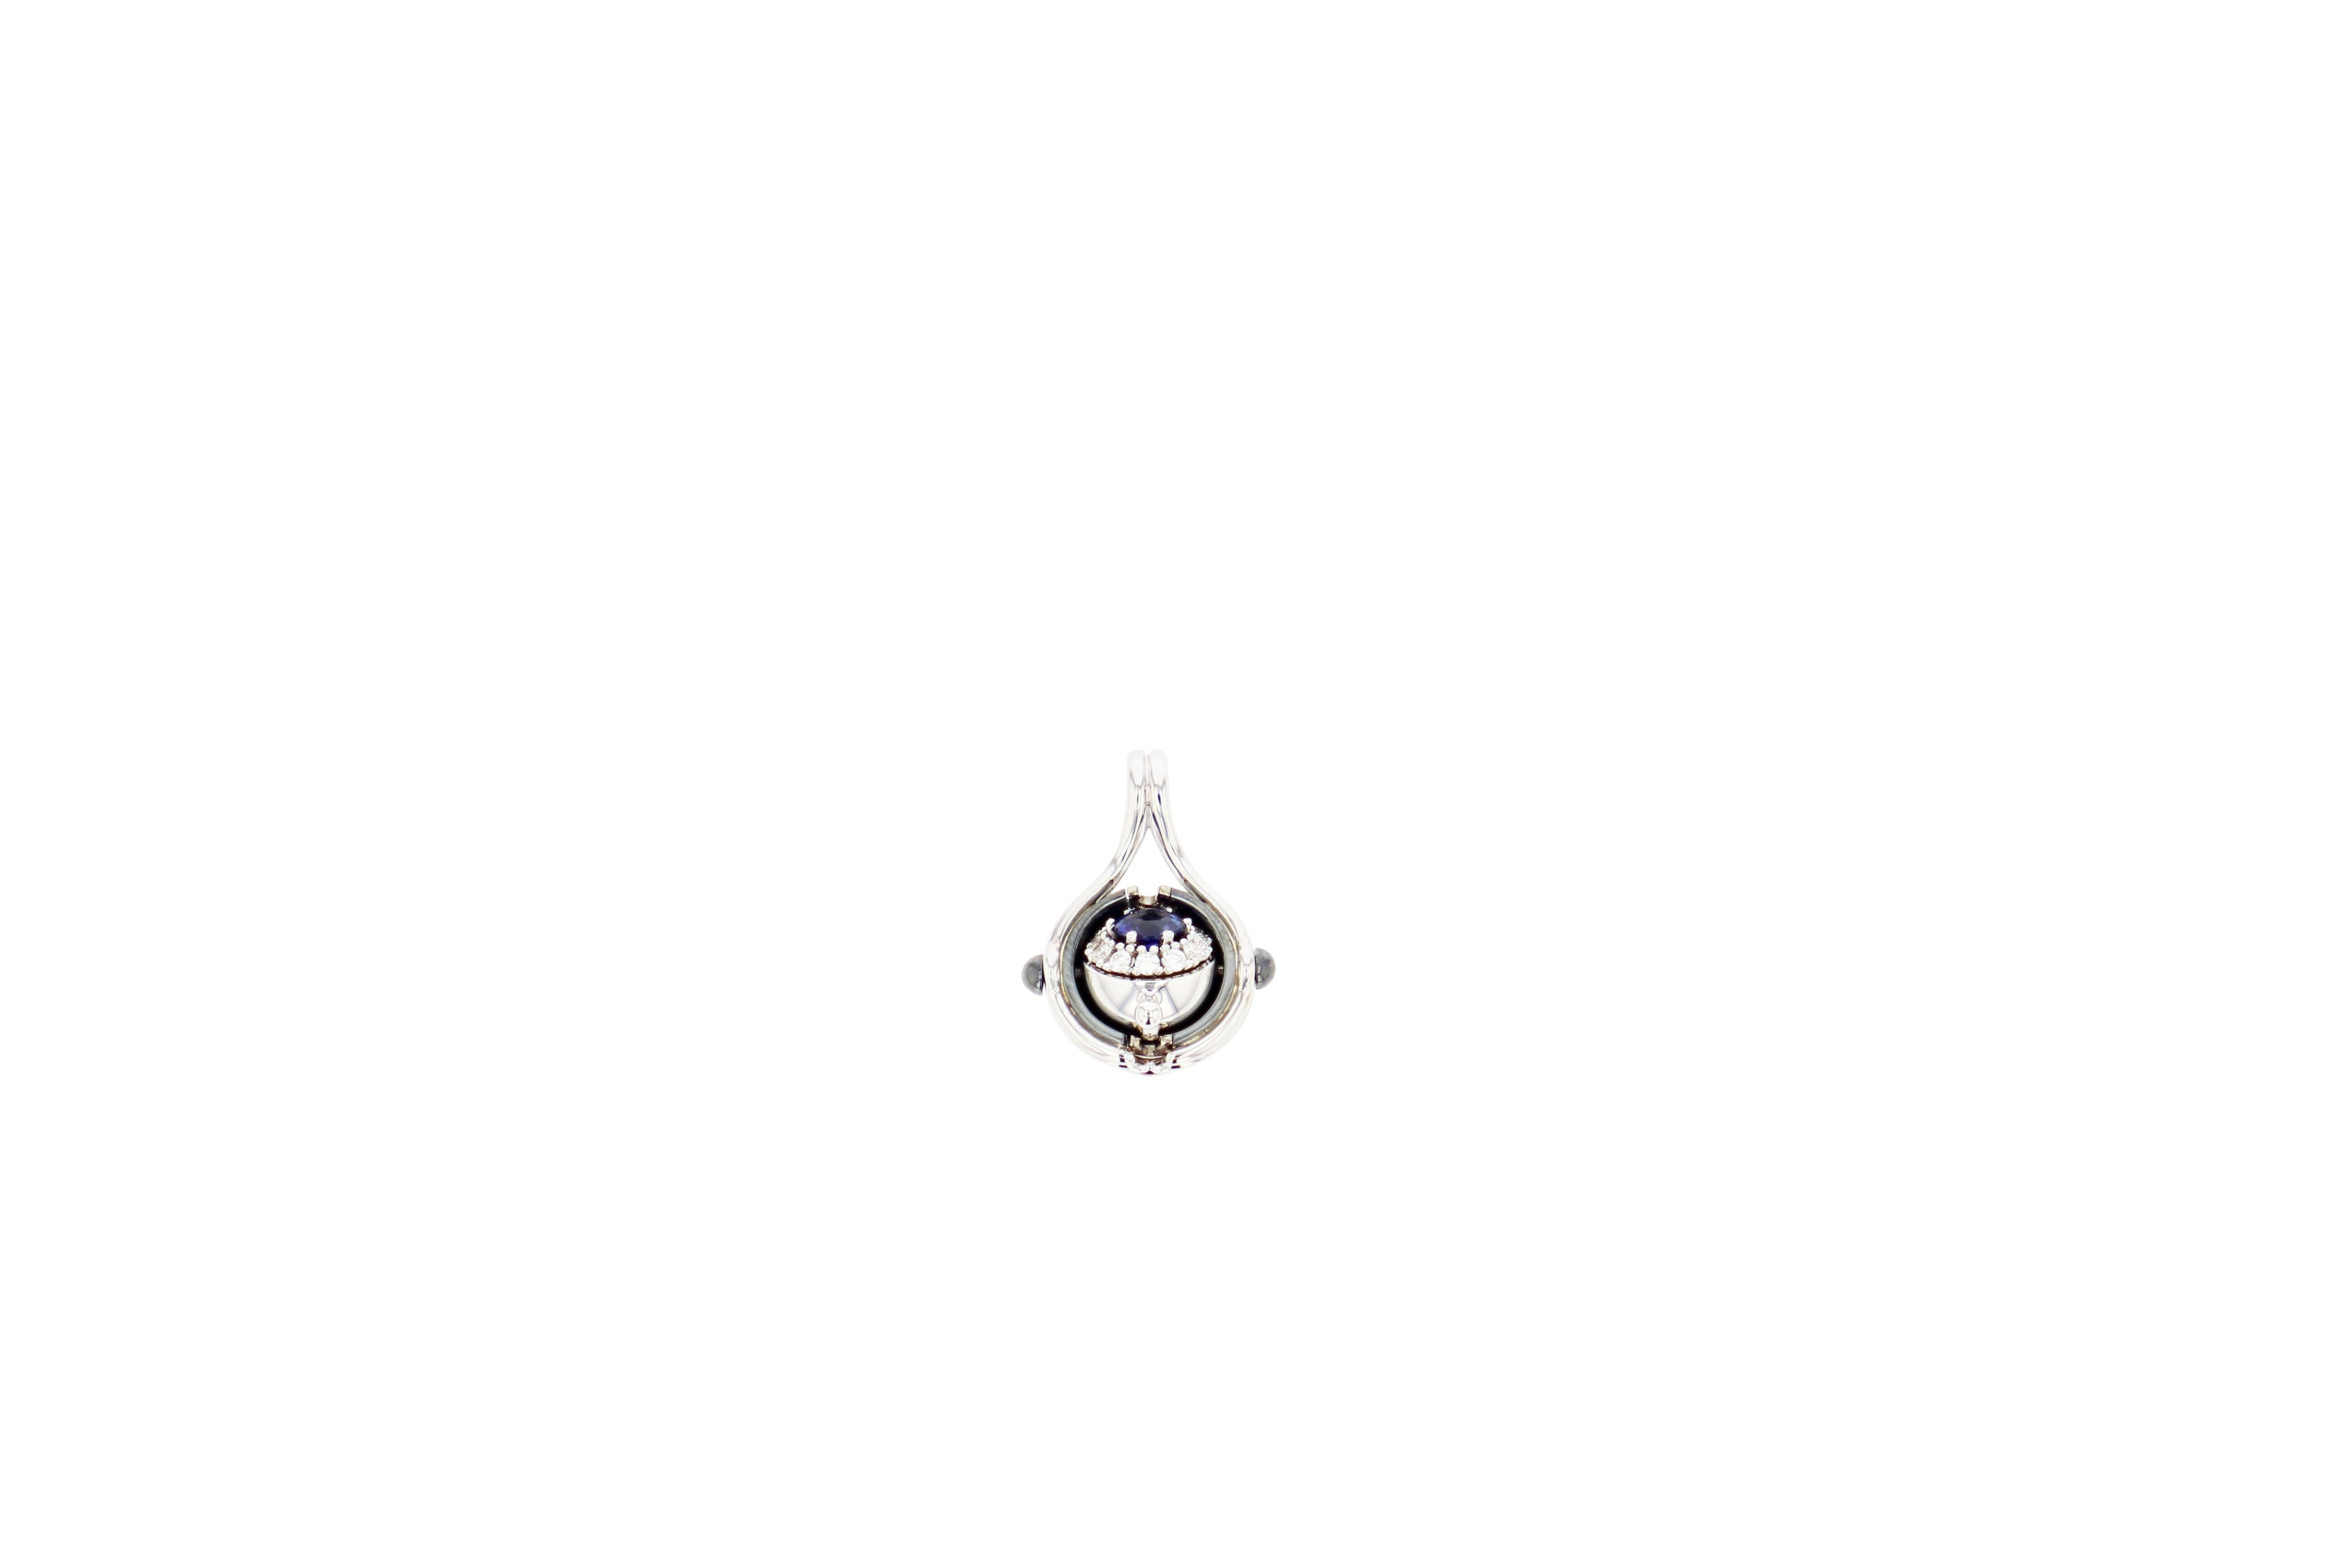 Blue Sapphire Diamonds Mira Pendant Necklace in 18k White Gold by Elie Top. Gold and distressed silver pendant. Rotating sphere revealing a blue sappphire surrounded by diamonds.

Sold with its chain. 

Information : 
Ruby: 0.30 cts 
12 Diamonds: